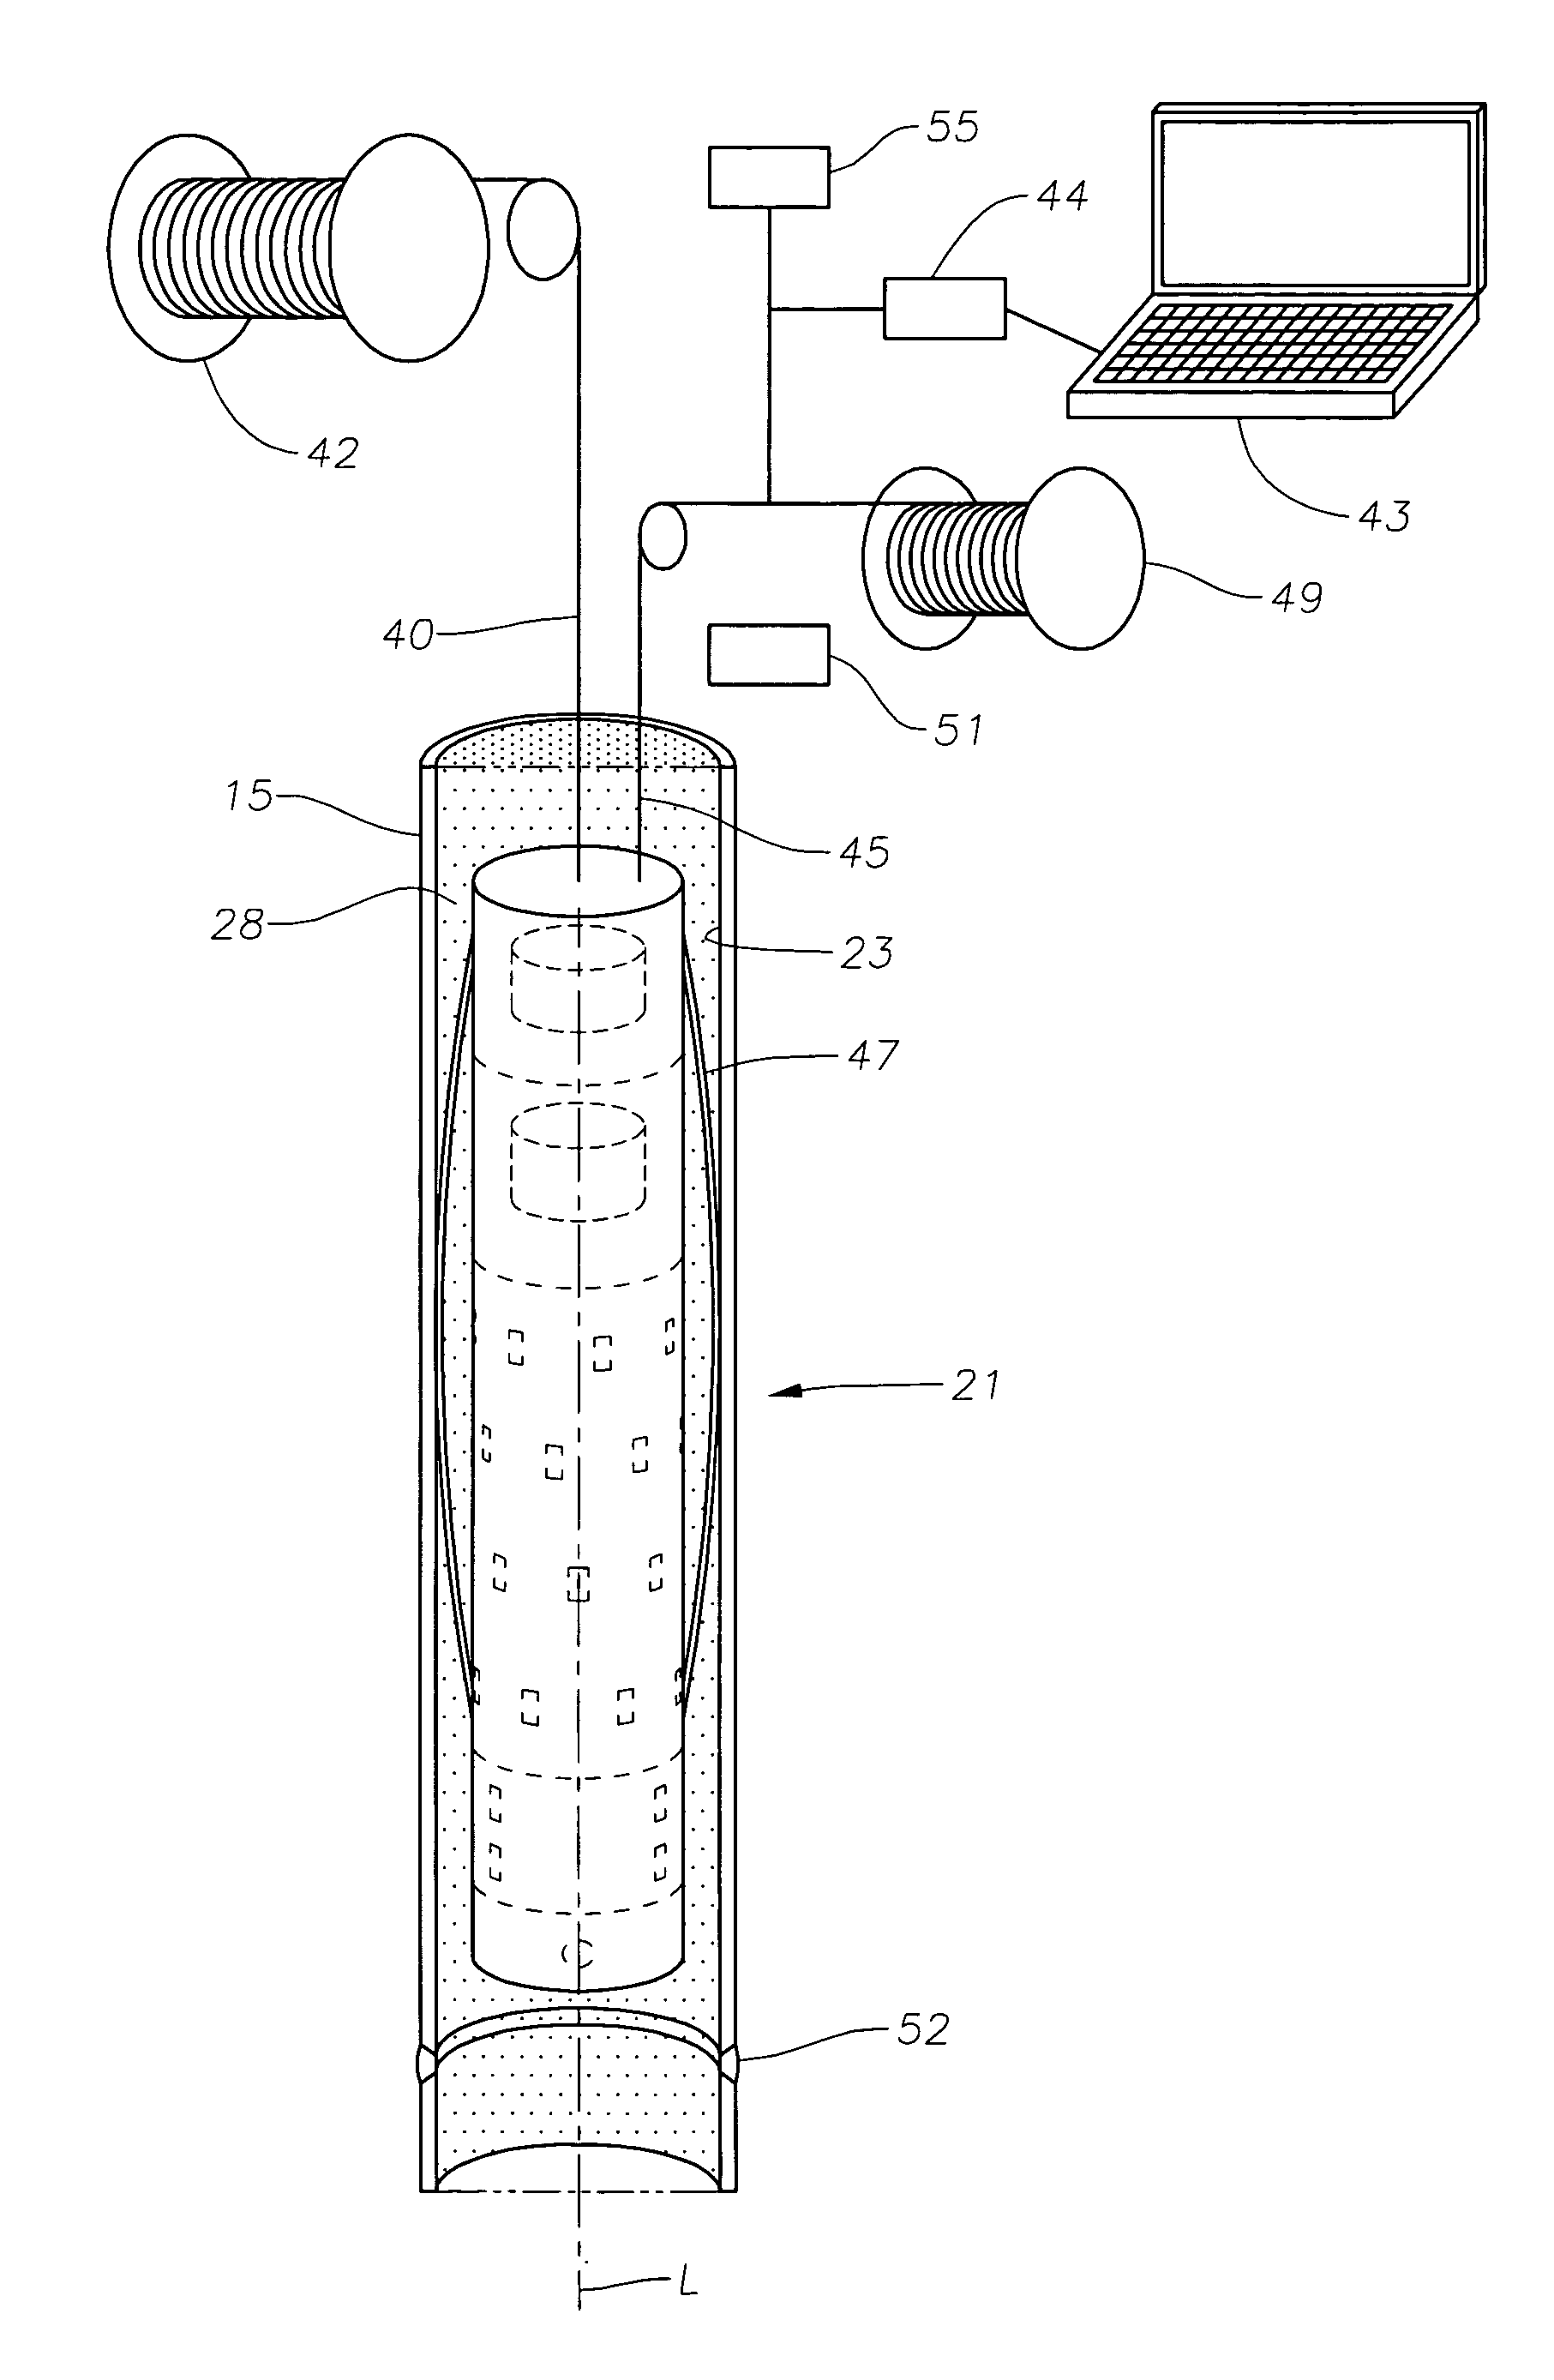 Internal riser inspection device and methods of using same